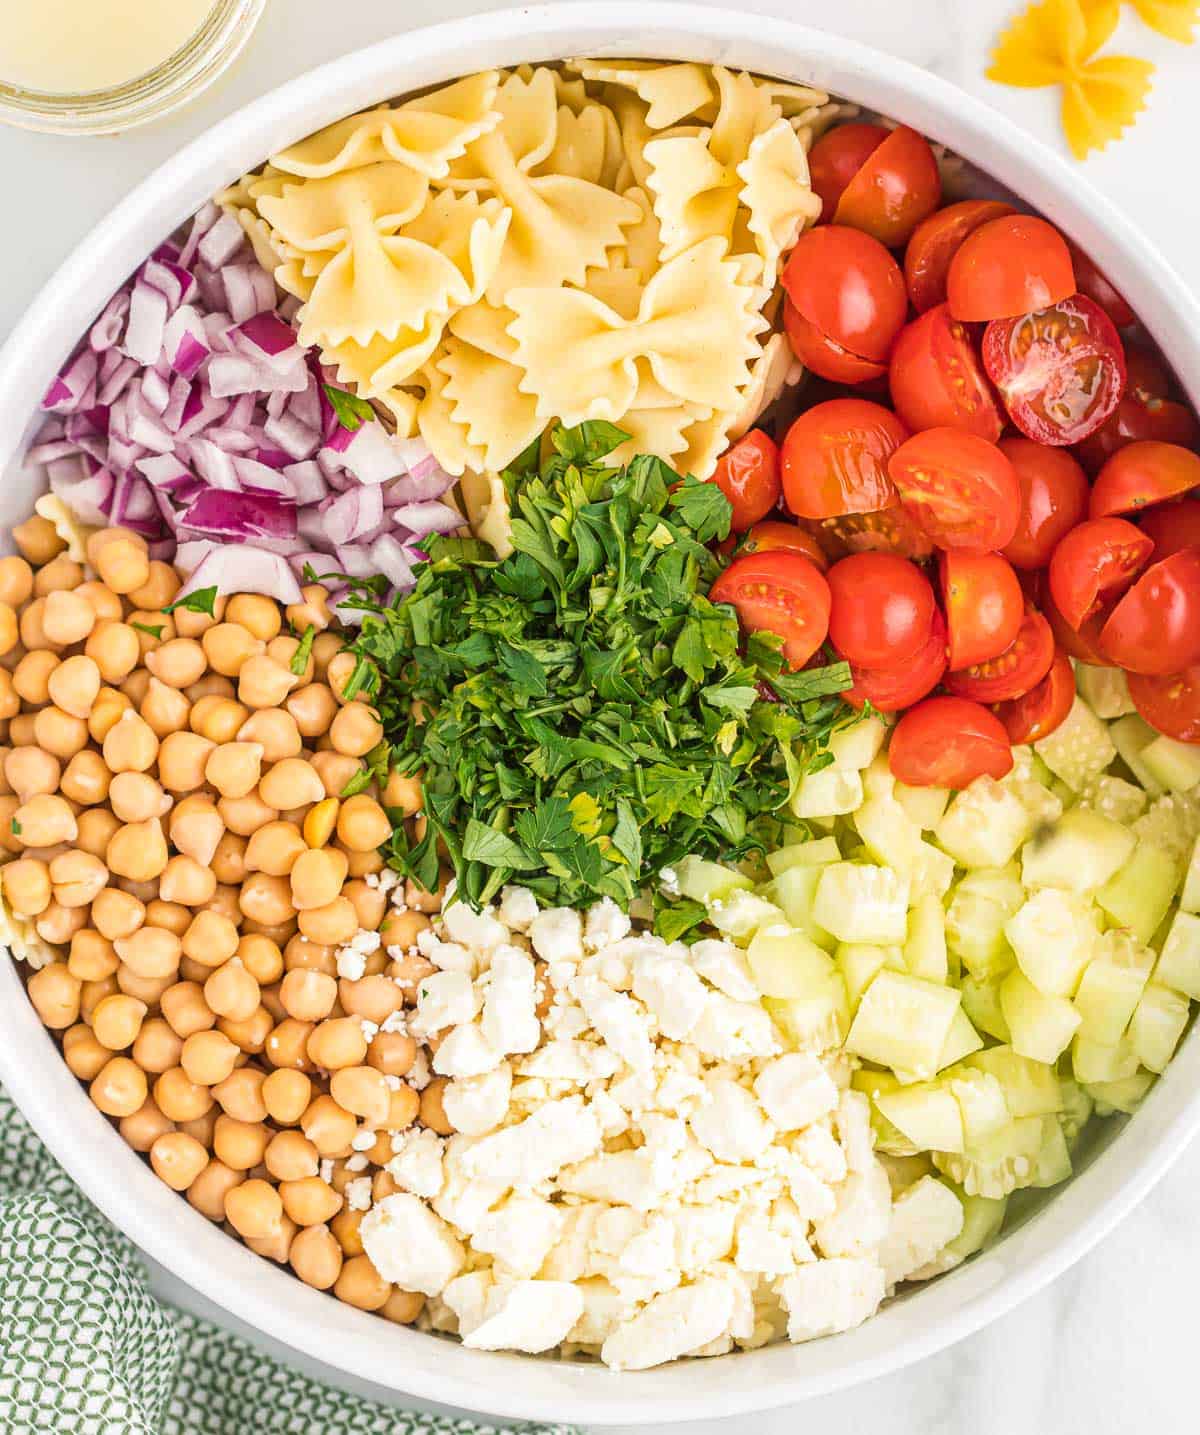 ingredients for pasta salad placed in groups in a mixing bowl